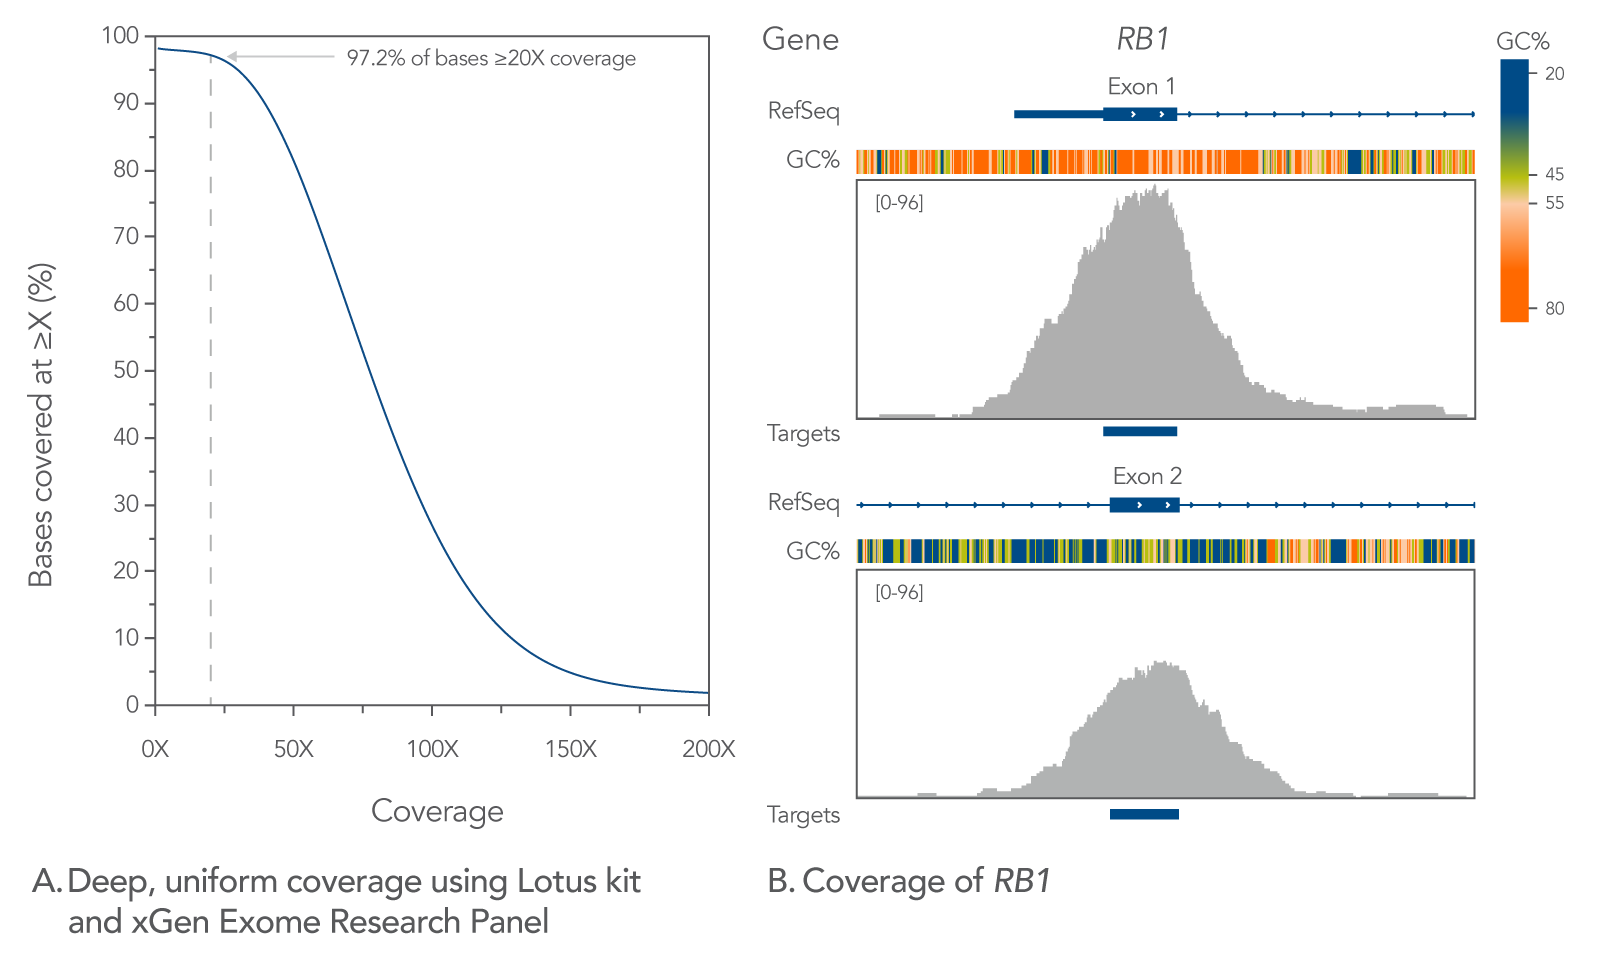 Uniform coverage with Lotus kit and xGen Exome Research Panel